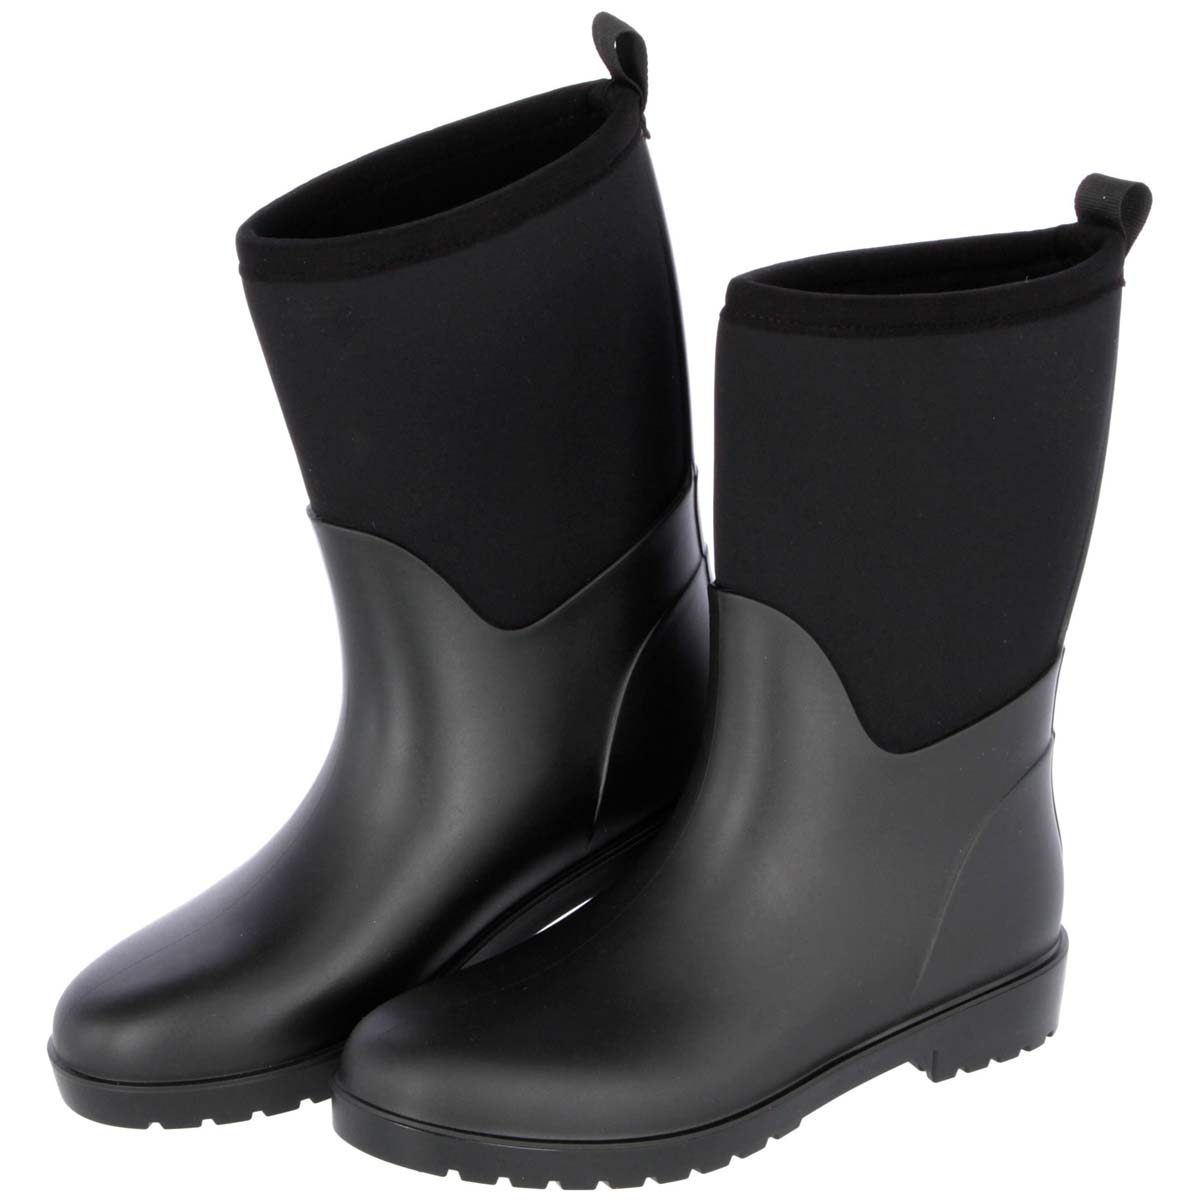 Boots NeoLite